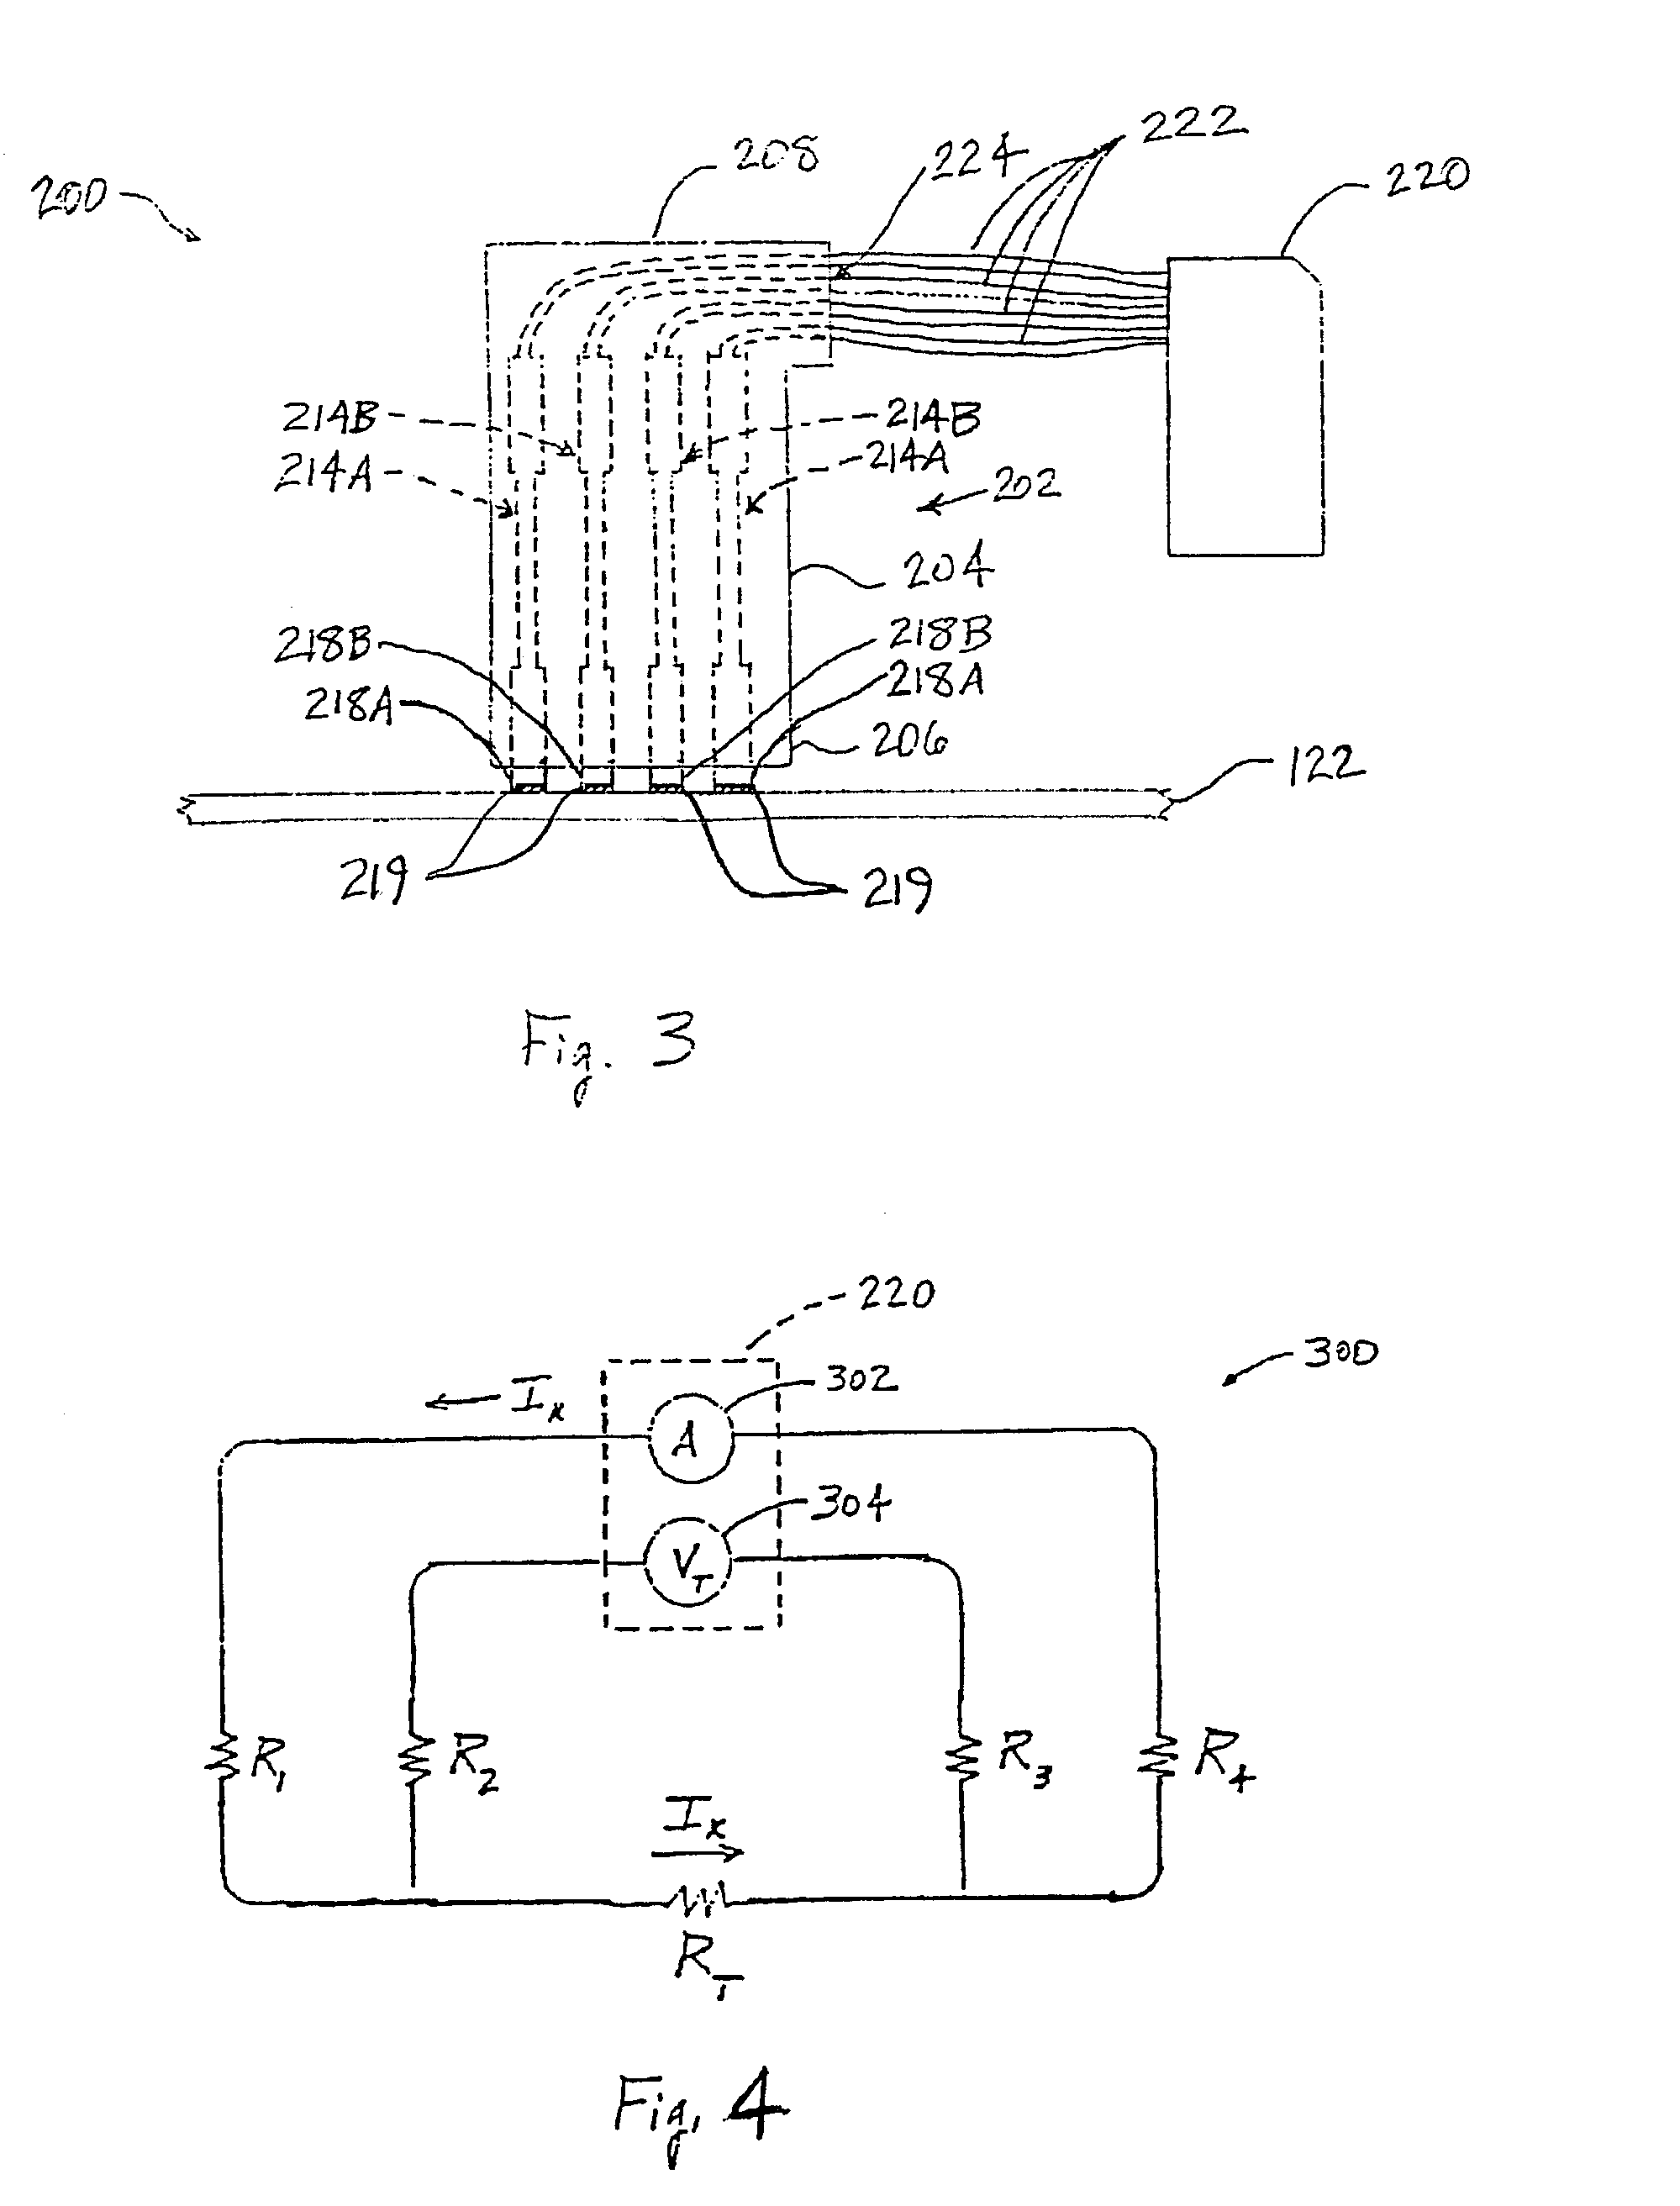 Apparatus and methods for measuring resistance of conductive layers